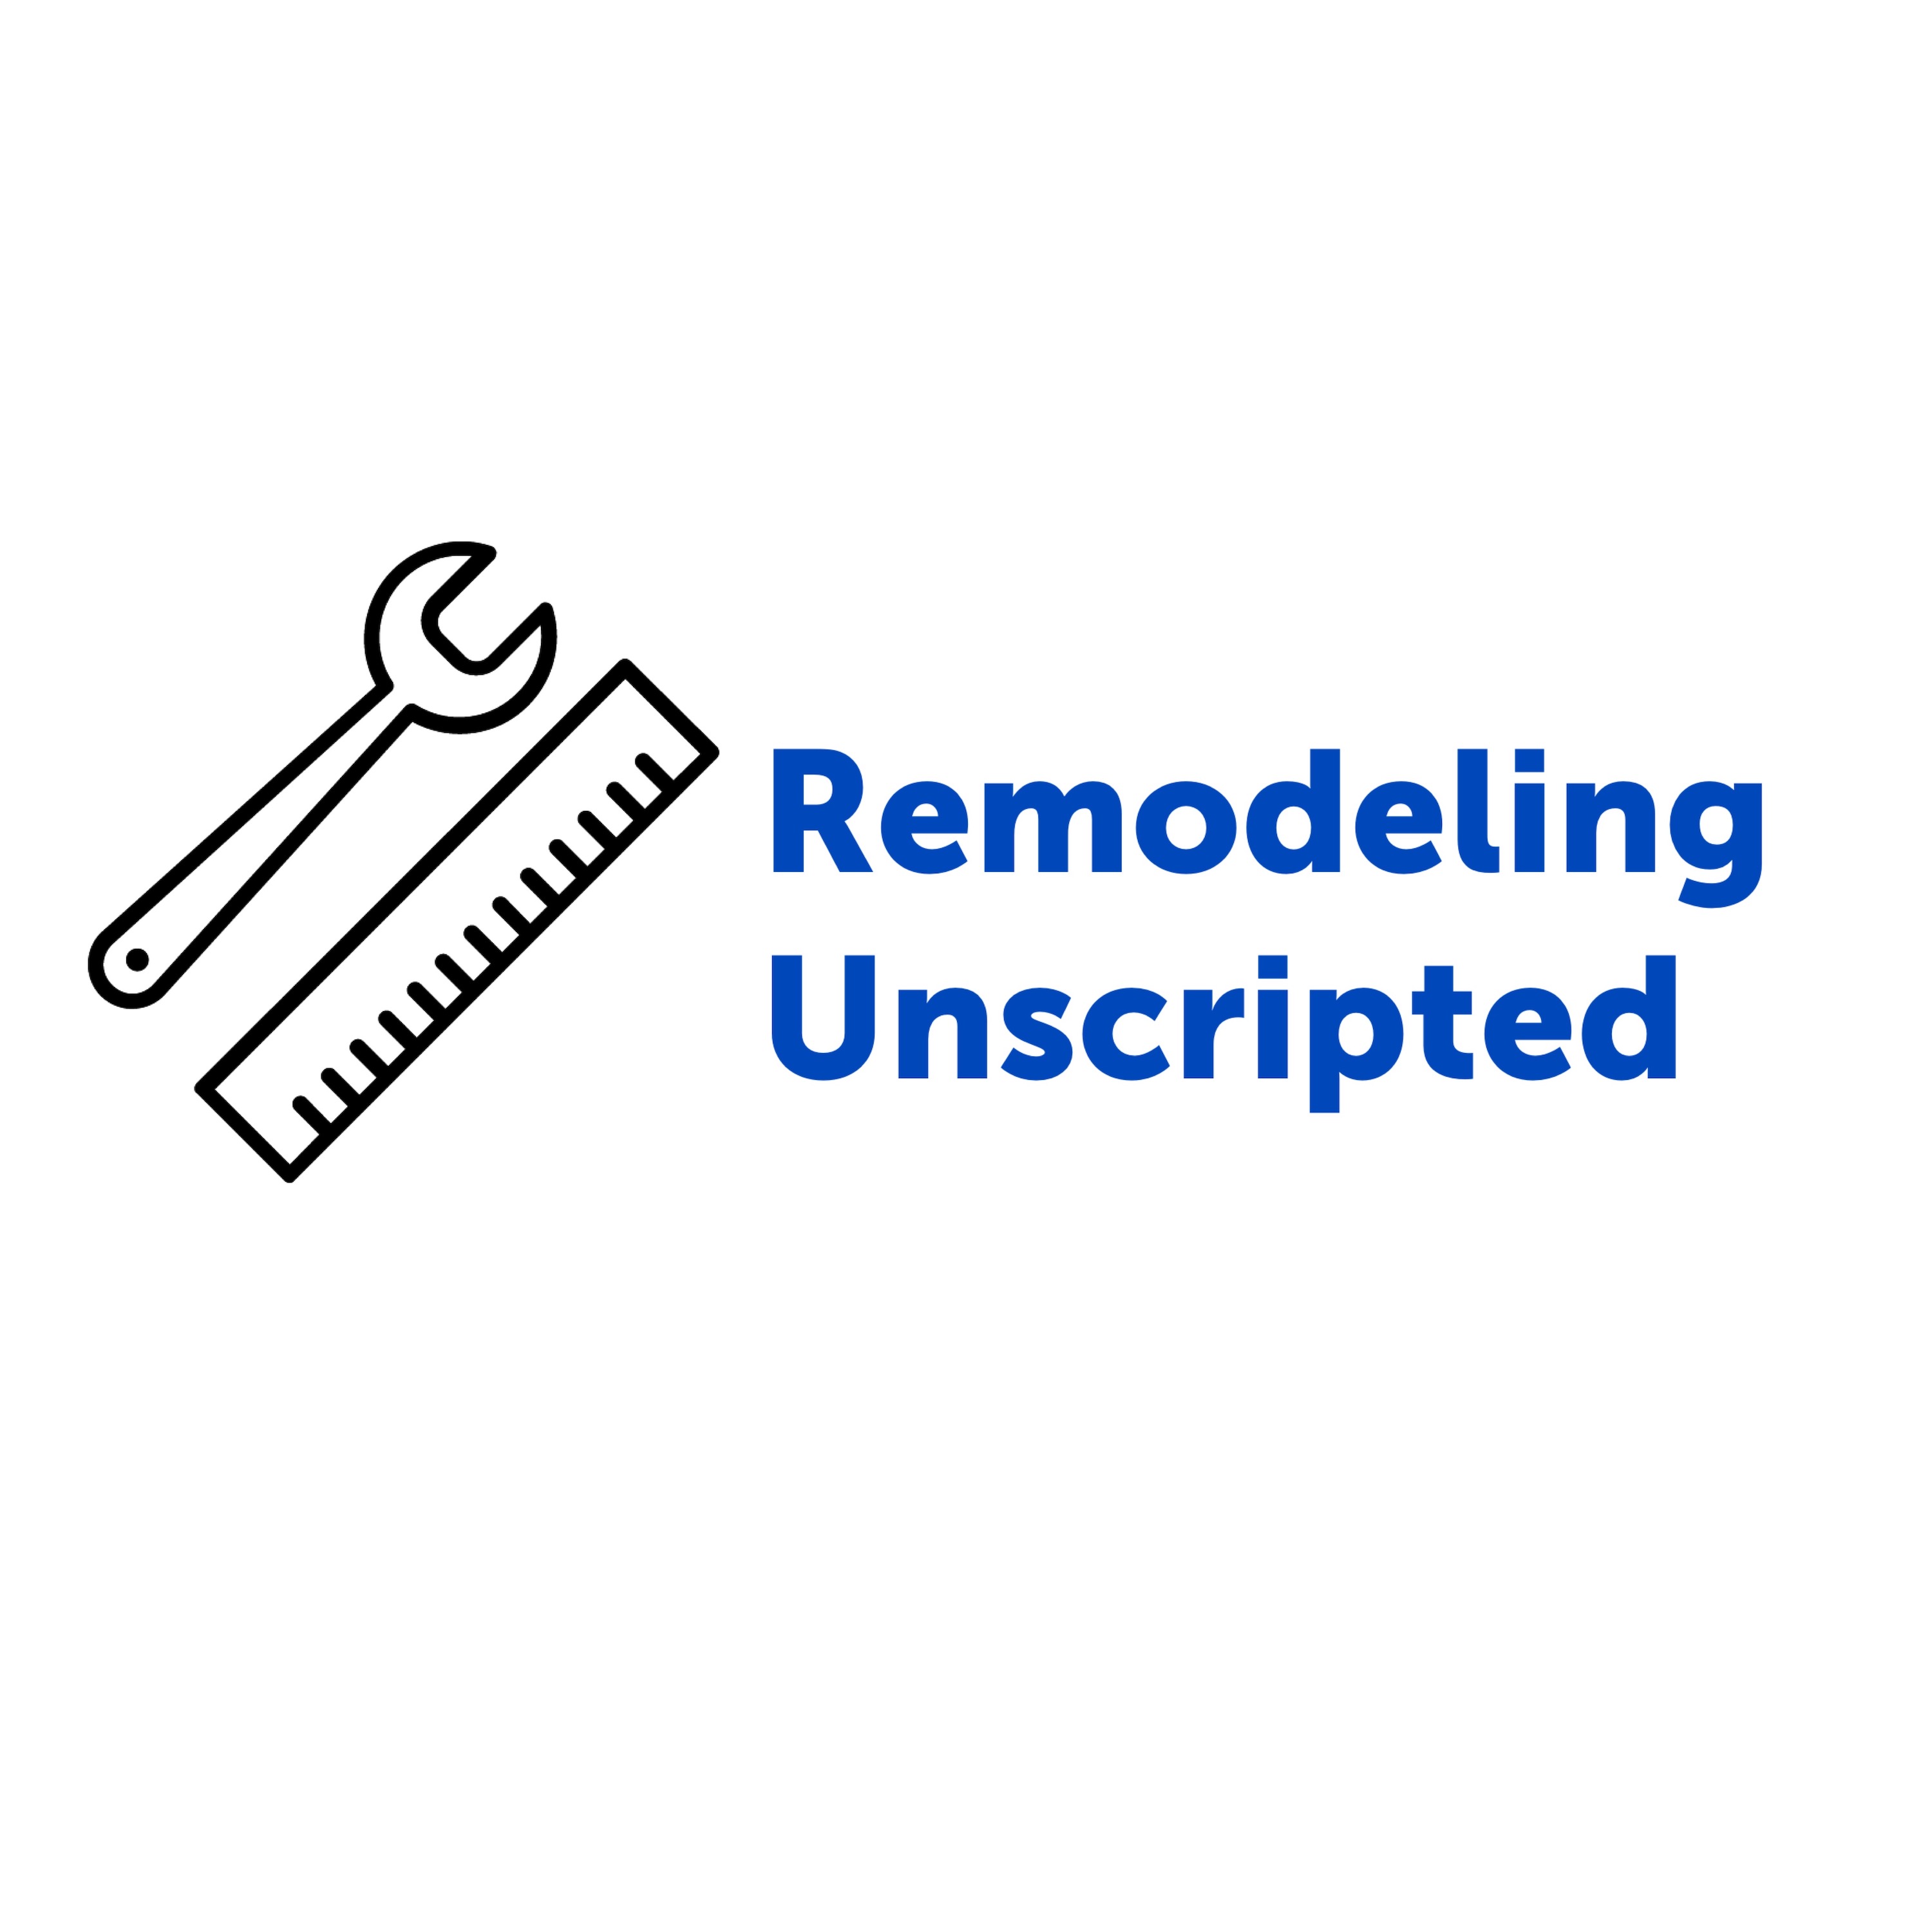 Remodeling Unscripted cover logo